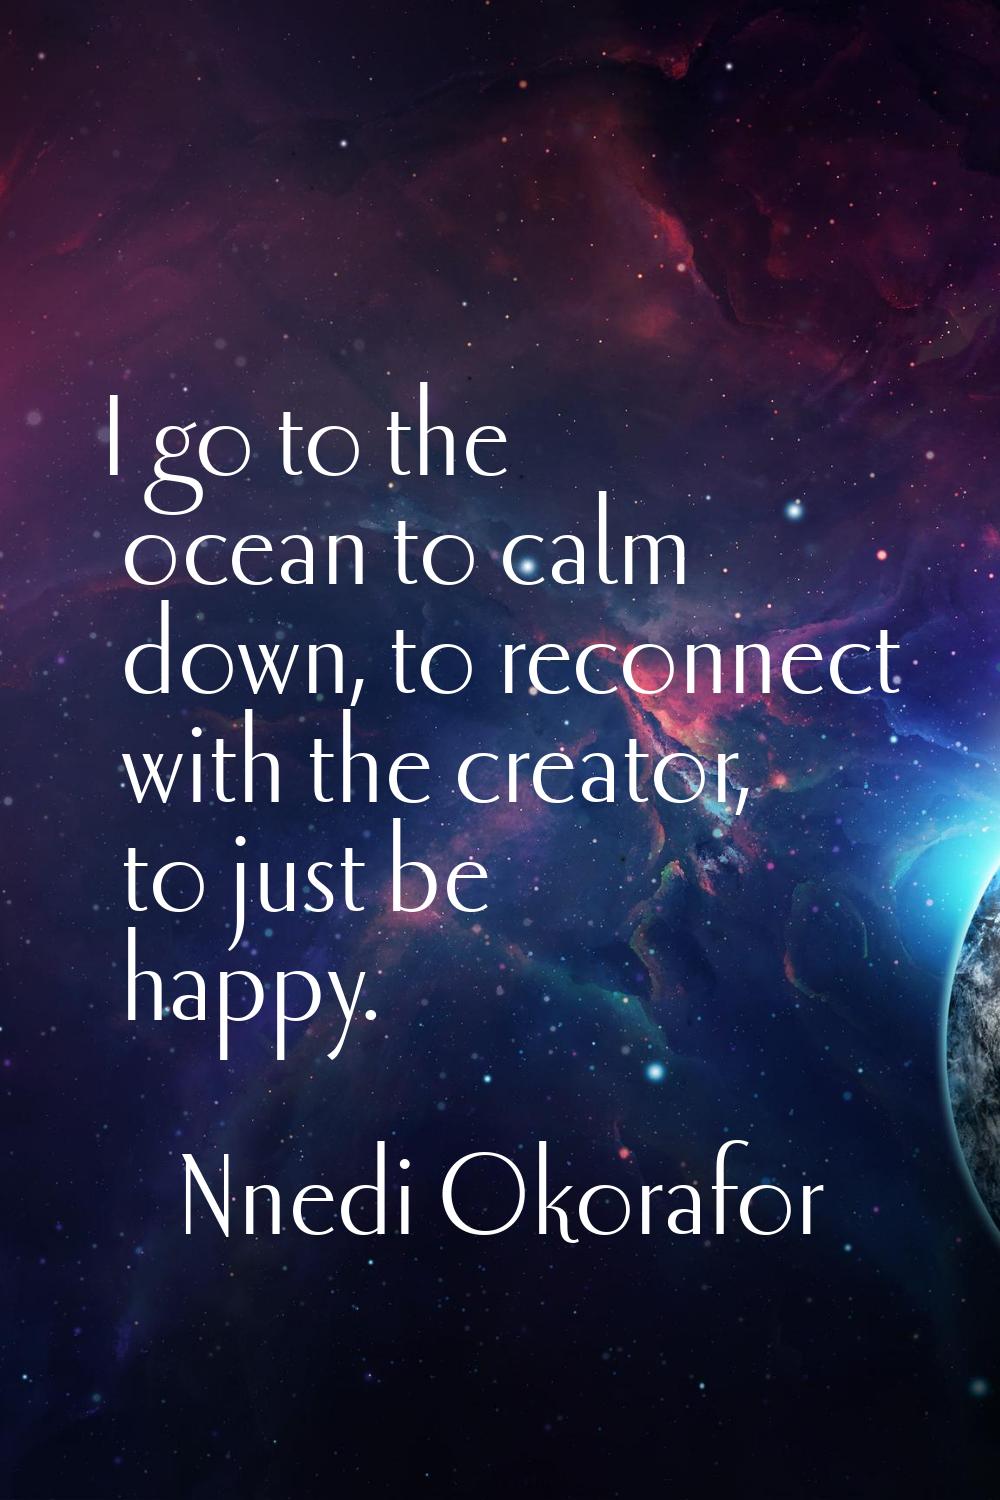 I go to the ocean to calm down, to reconnect with the creator, to just be happy.